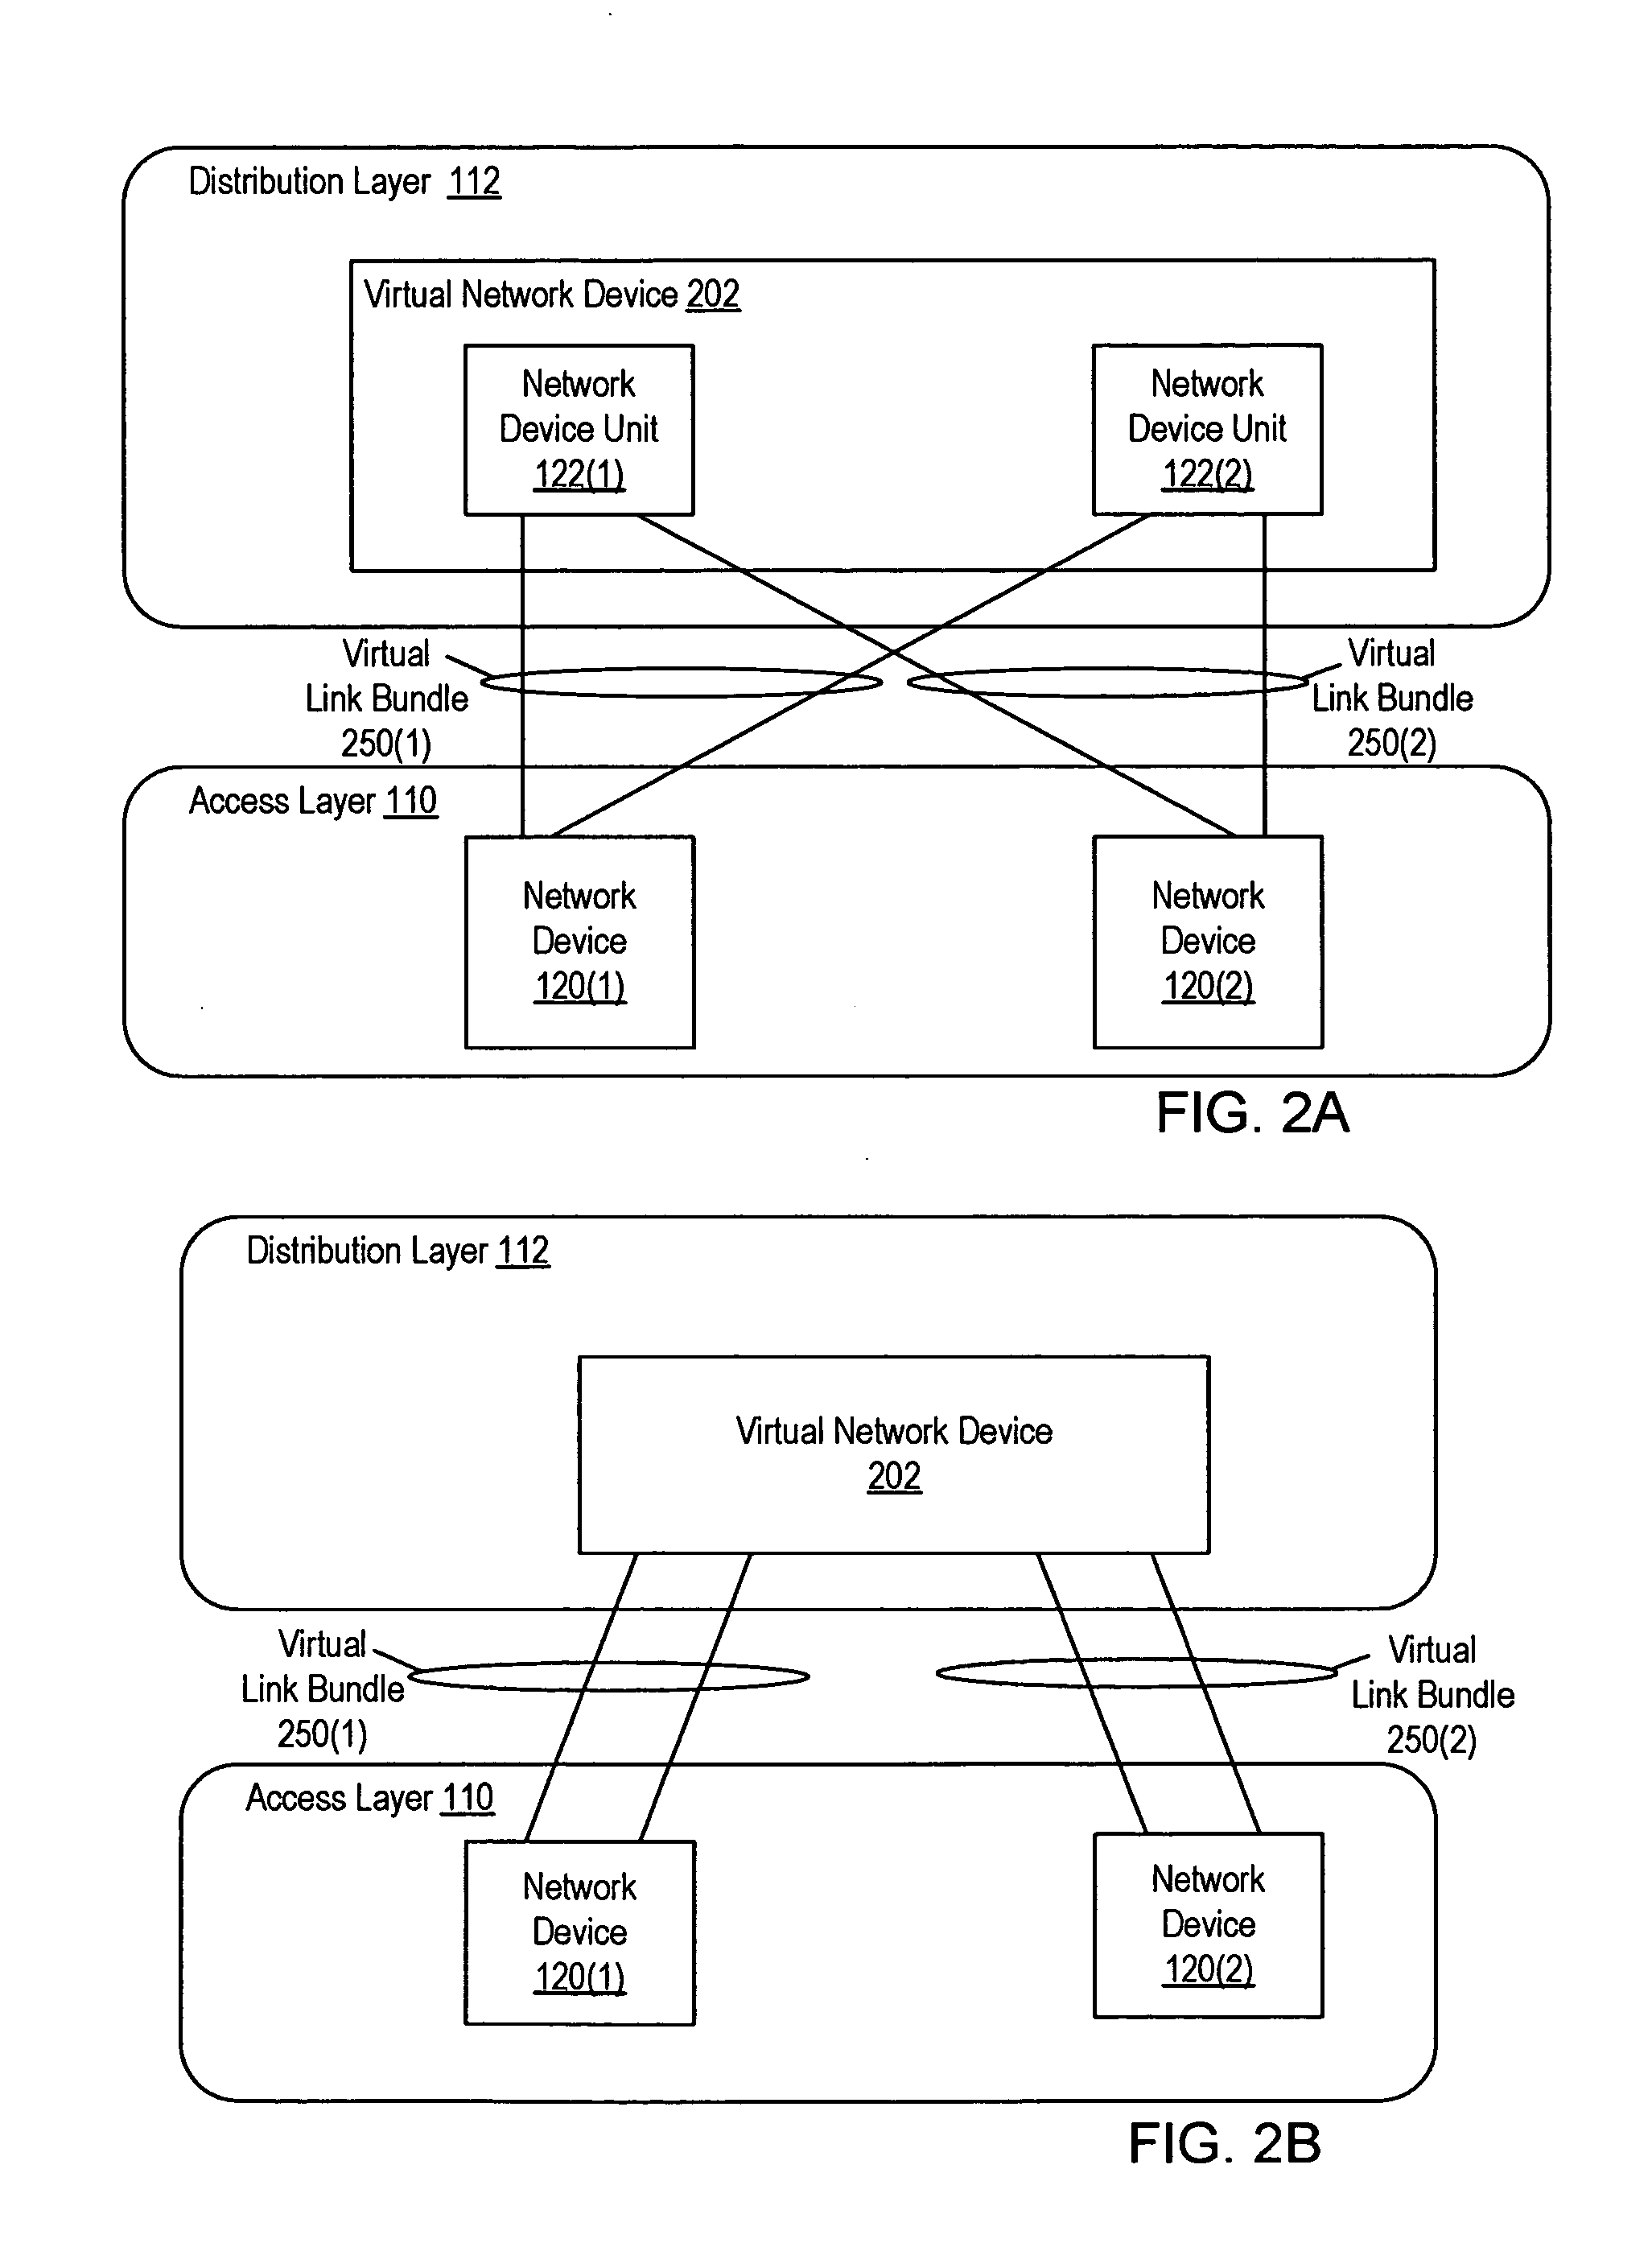 Distributed forwarding in virtual network devices